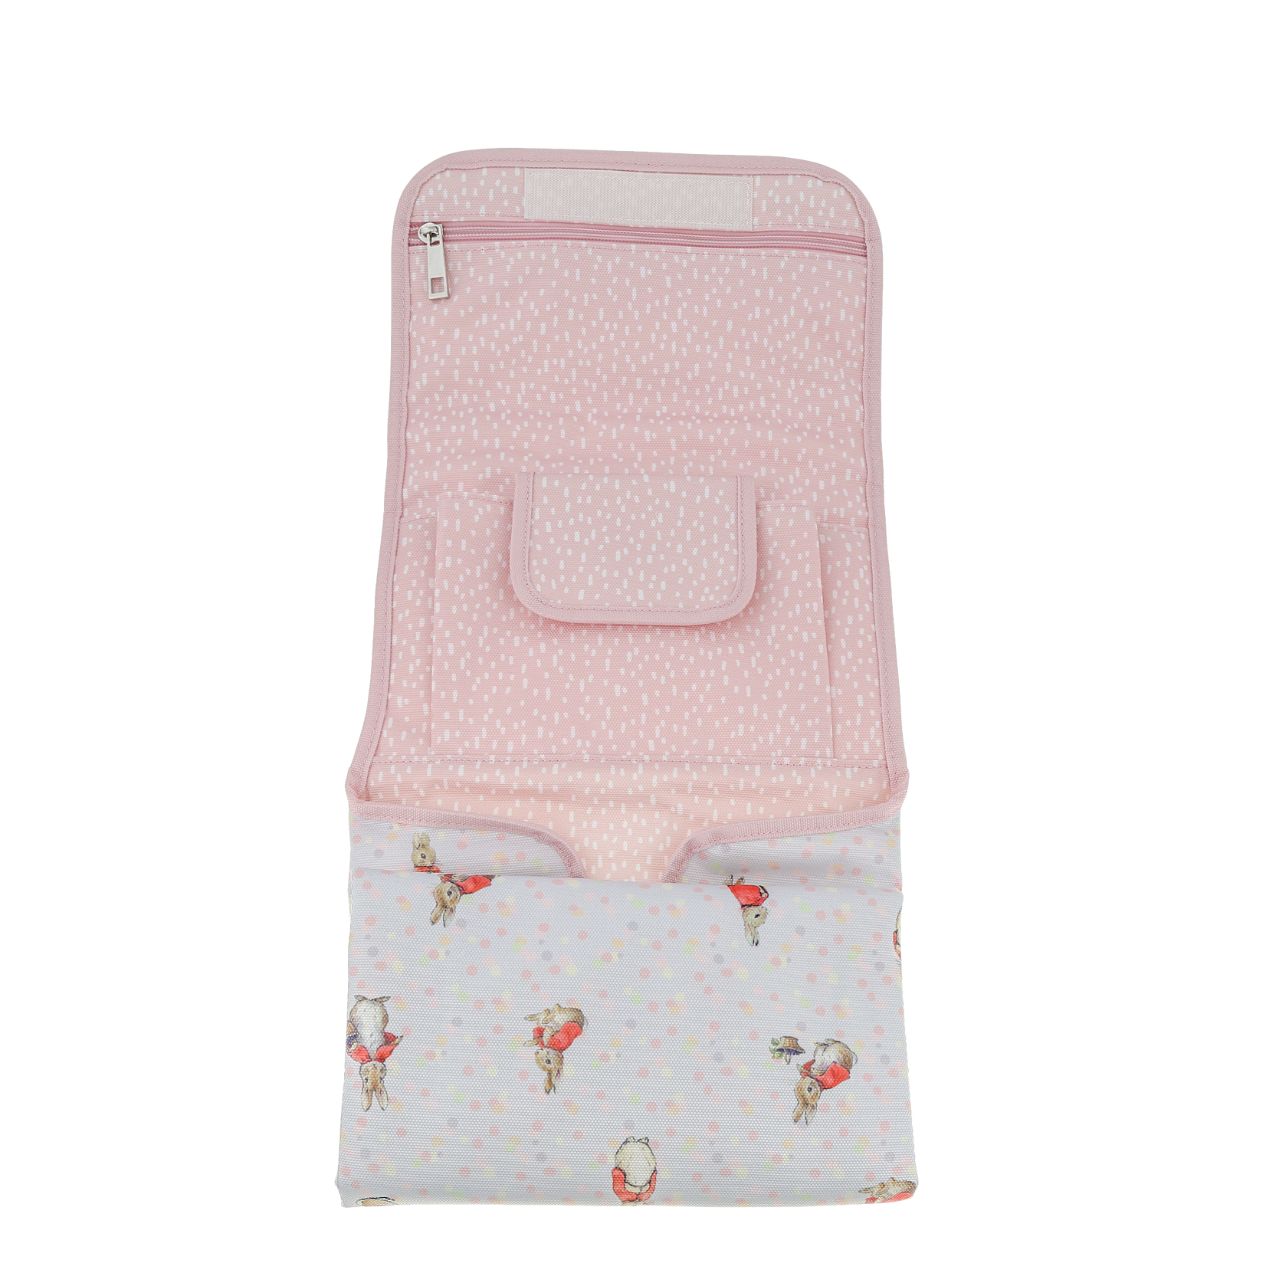 Beatrix Potter Peter Rabbit Baby Collection Changing Mat  This fold out Peter Rabbit changing mat is both adorable, practical and essential for quick trips out with your baby. The changing mat has been designed to take you seconds to unwrap and use when you are on the go, helping to spend more time on the things you love doing with your baby.